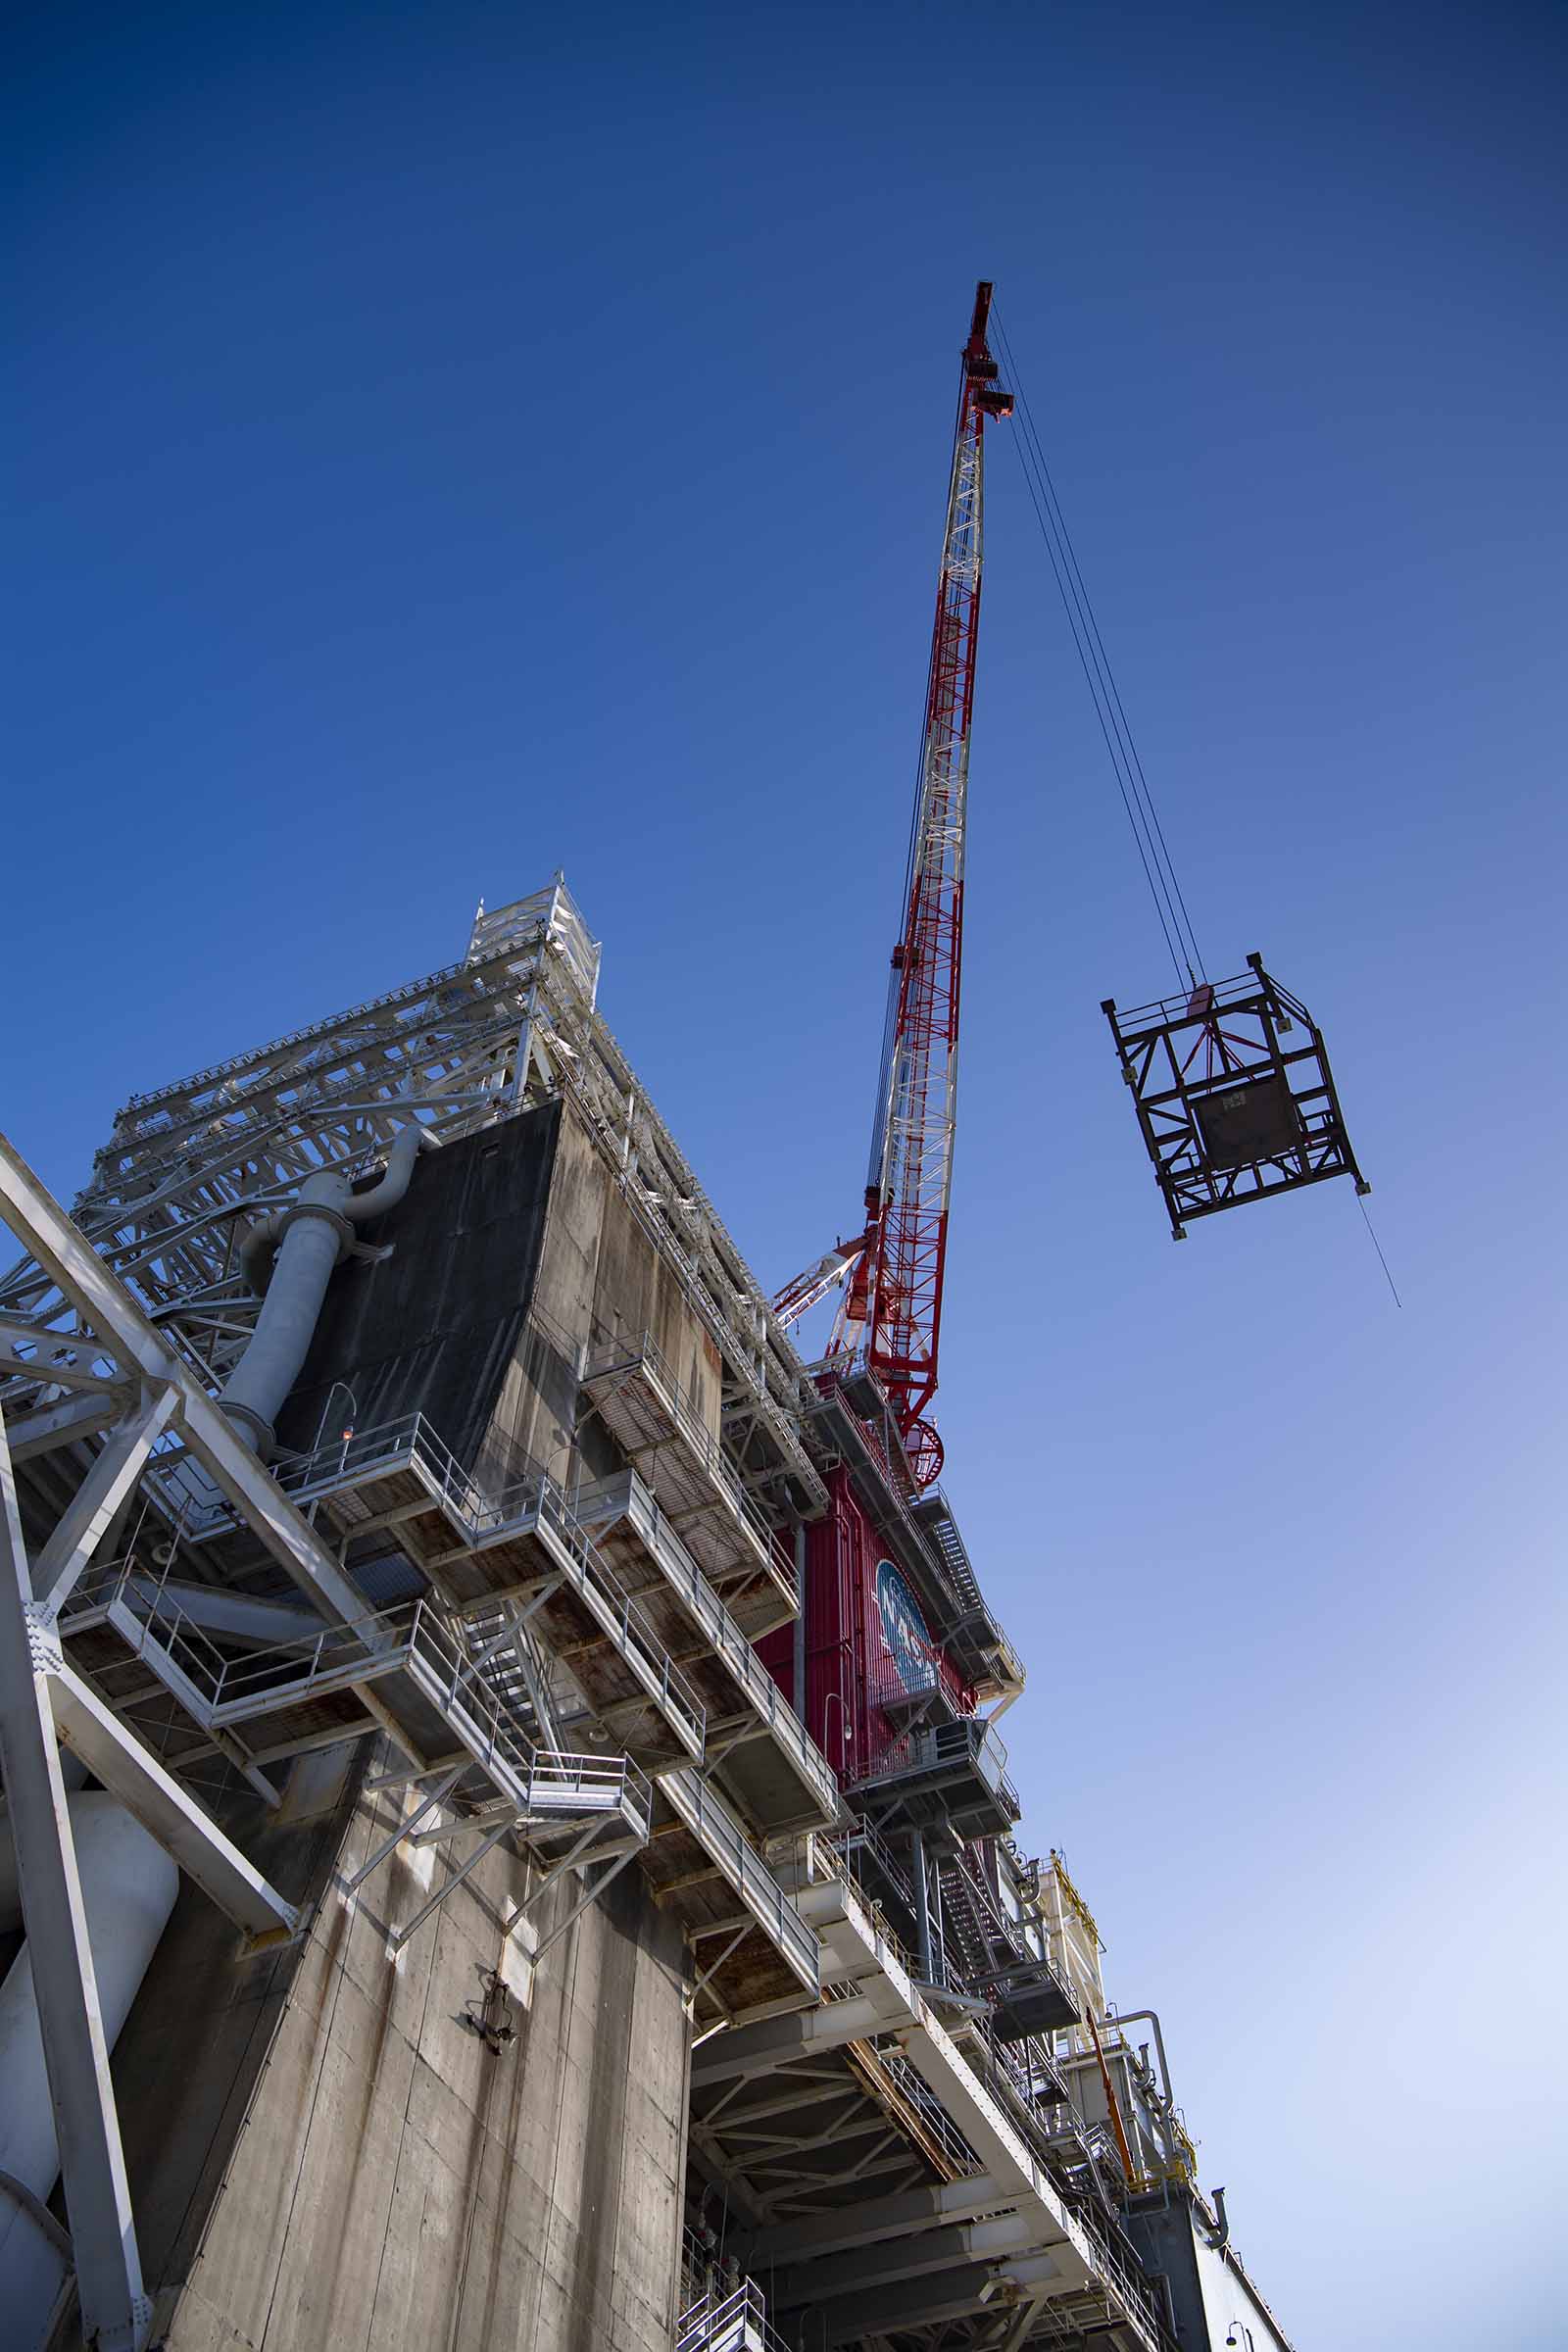 umbilical support structure at the site’s B-2 Test Stand for future testing of the new Exploration Upper Stage (EUS) that will fly on future Artemis missions to the Moon and beyond.